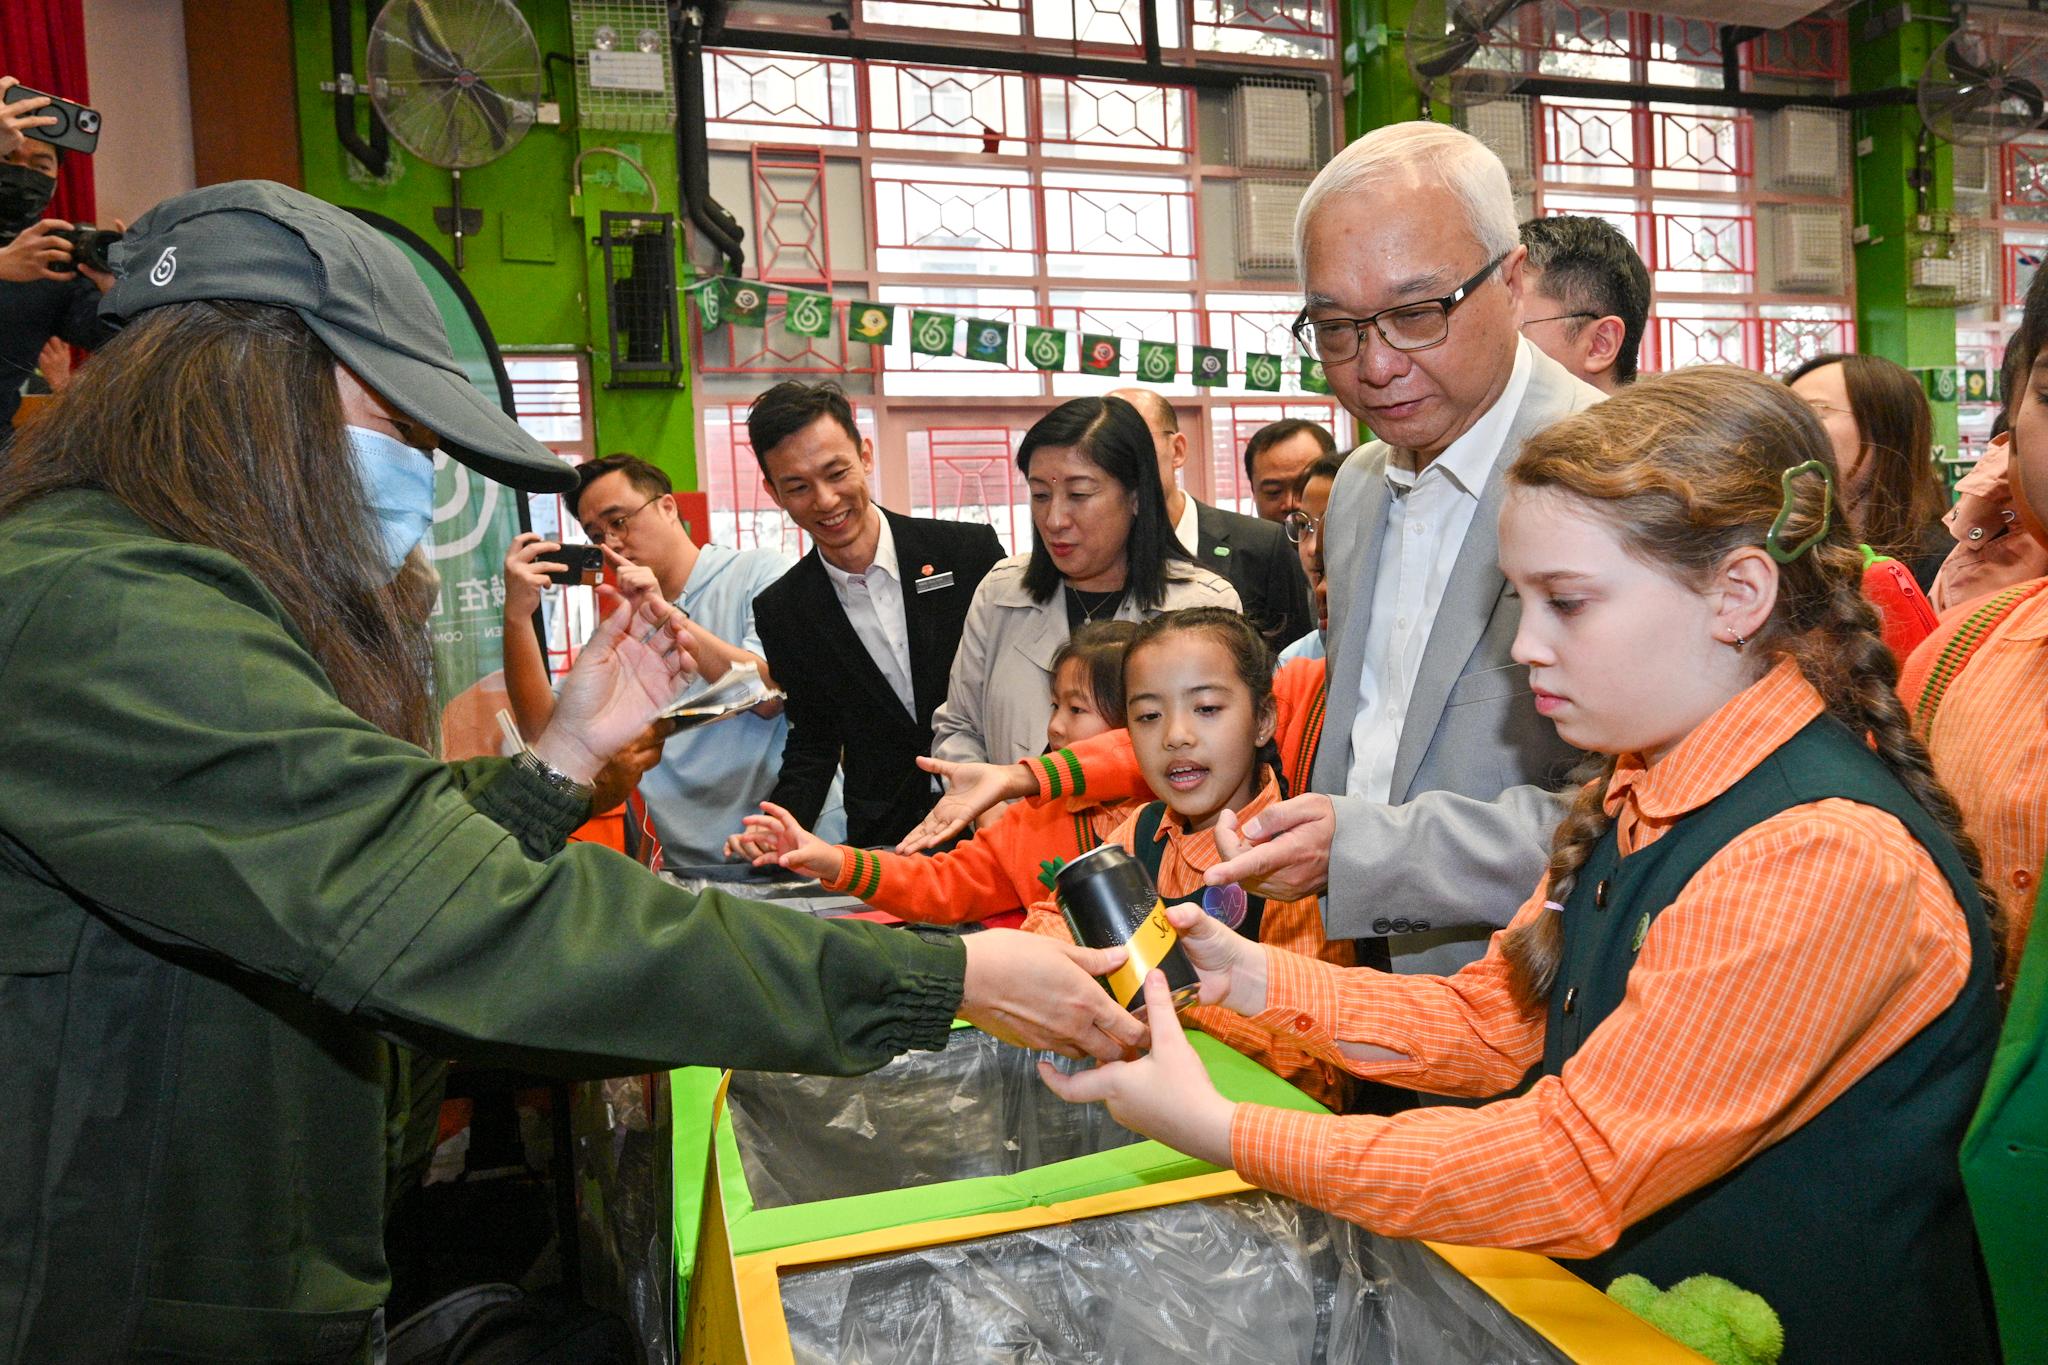 The Secretary for Environment and Ecology, Mr Tse Chin-wan, and the Under Secretary for Education, Mr Sze Chun-fai, today (January 16) visited Yaumati Kaifong Association School to promote municipal solid waste (MSW) charging to students. Photo shows Mr Tse (second right) participating in a quiz game on MSW charging together with school students.